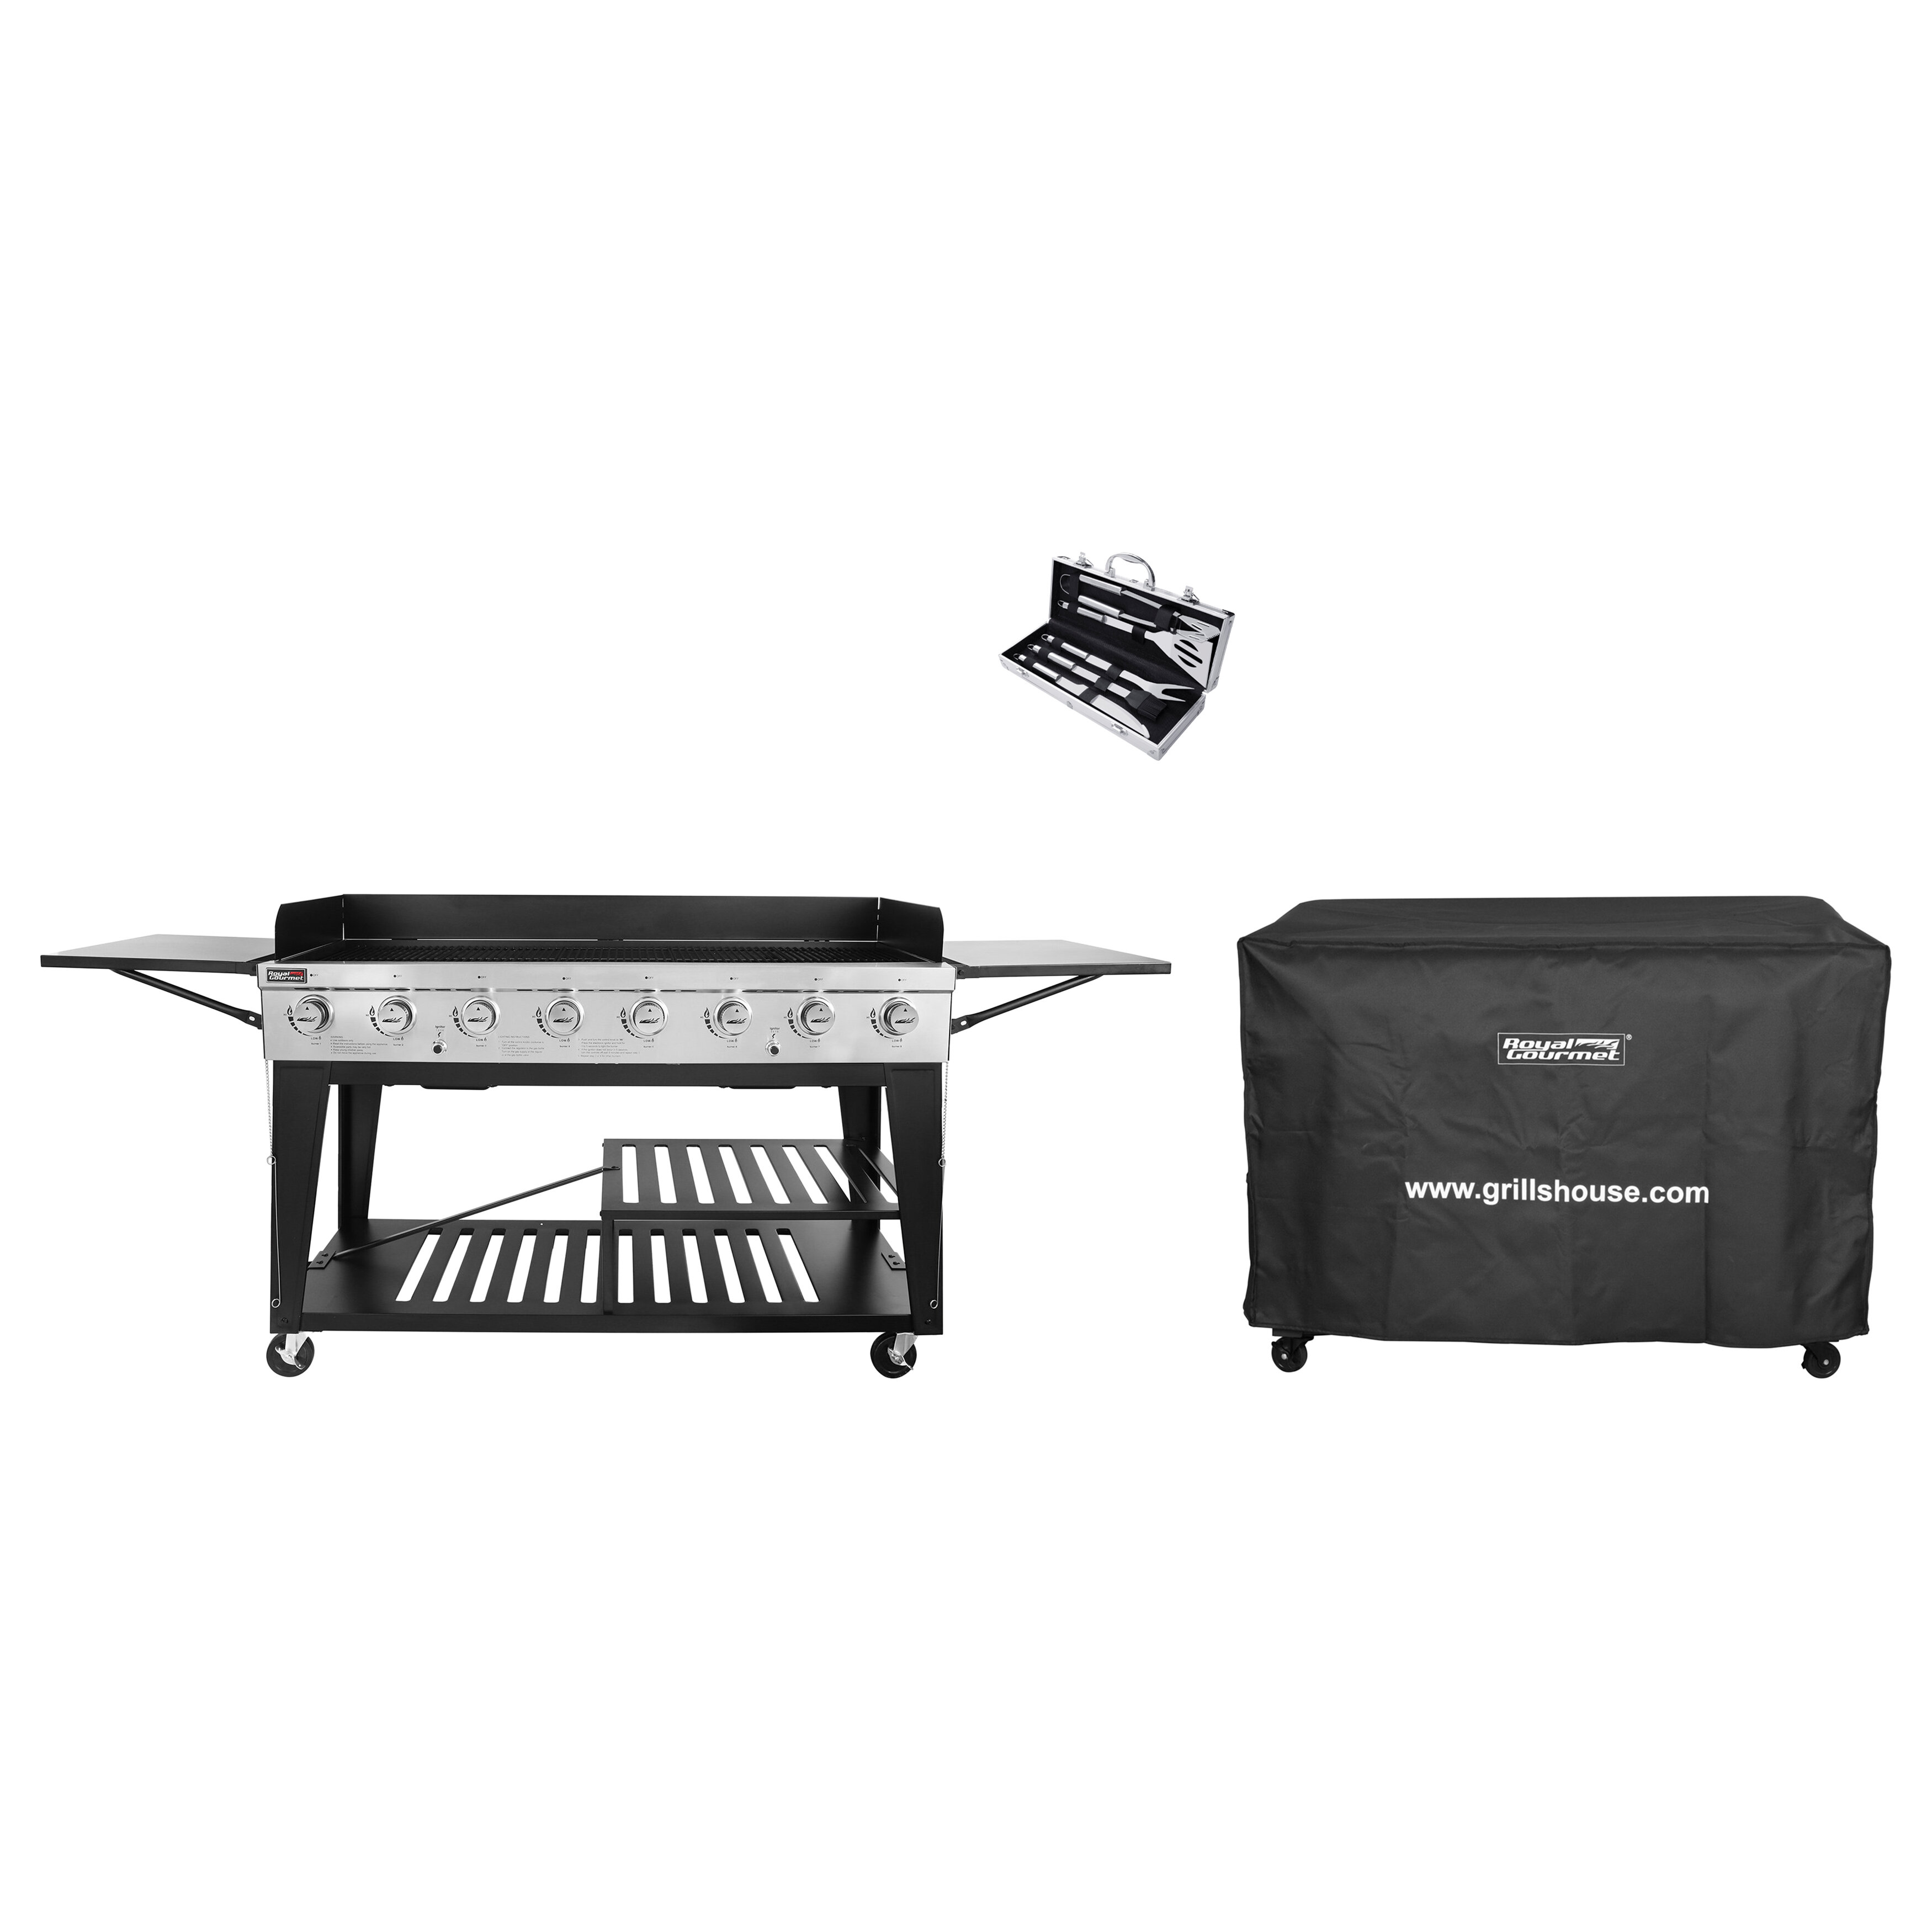 Royal Gourmet GB8001 8-Burner BBQ Gas Propane Grill Outdoor Large Party 